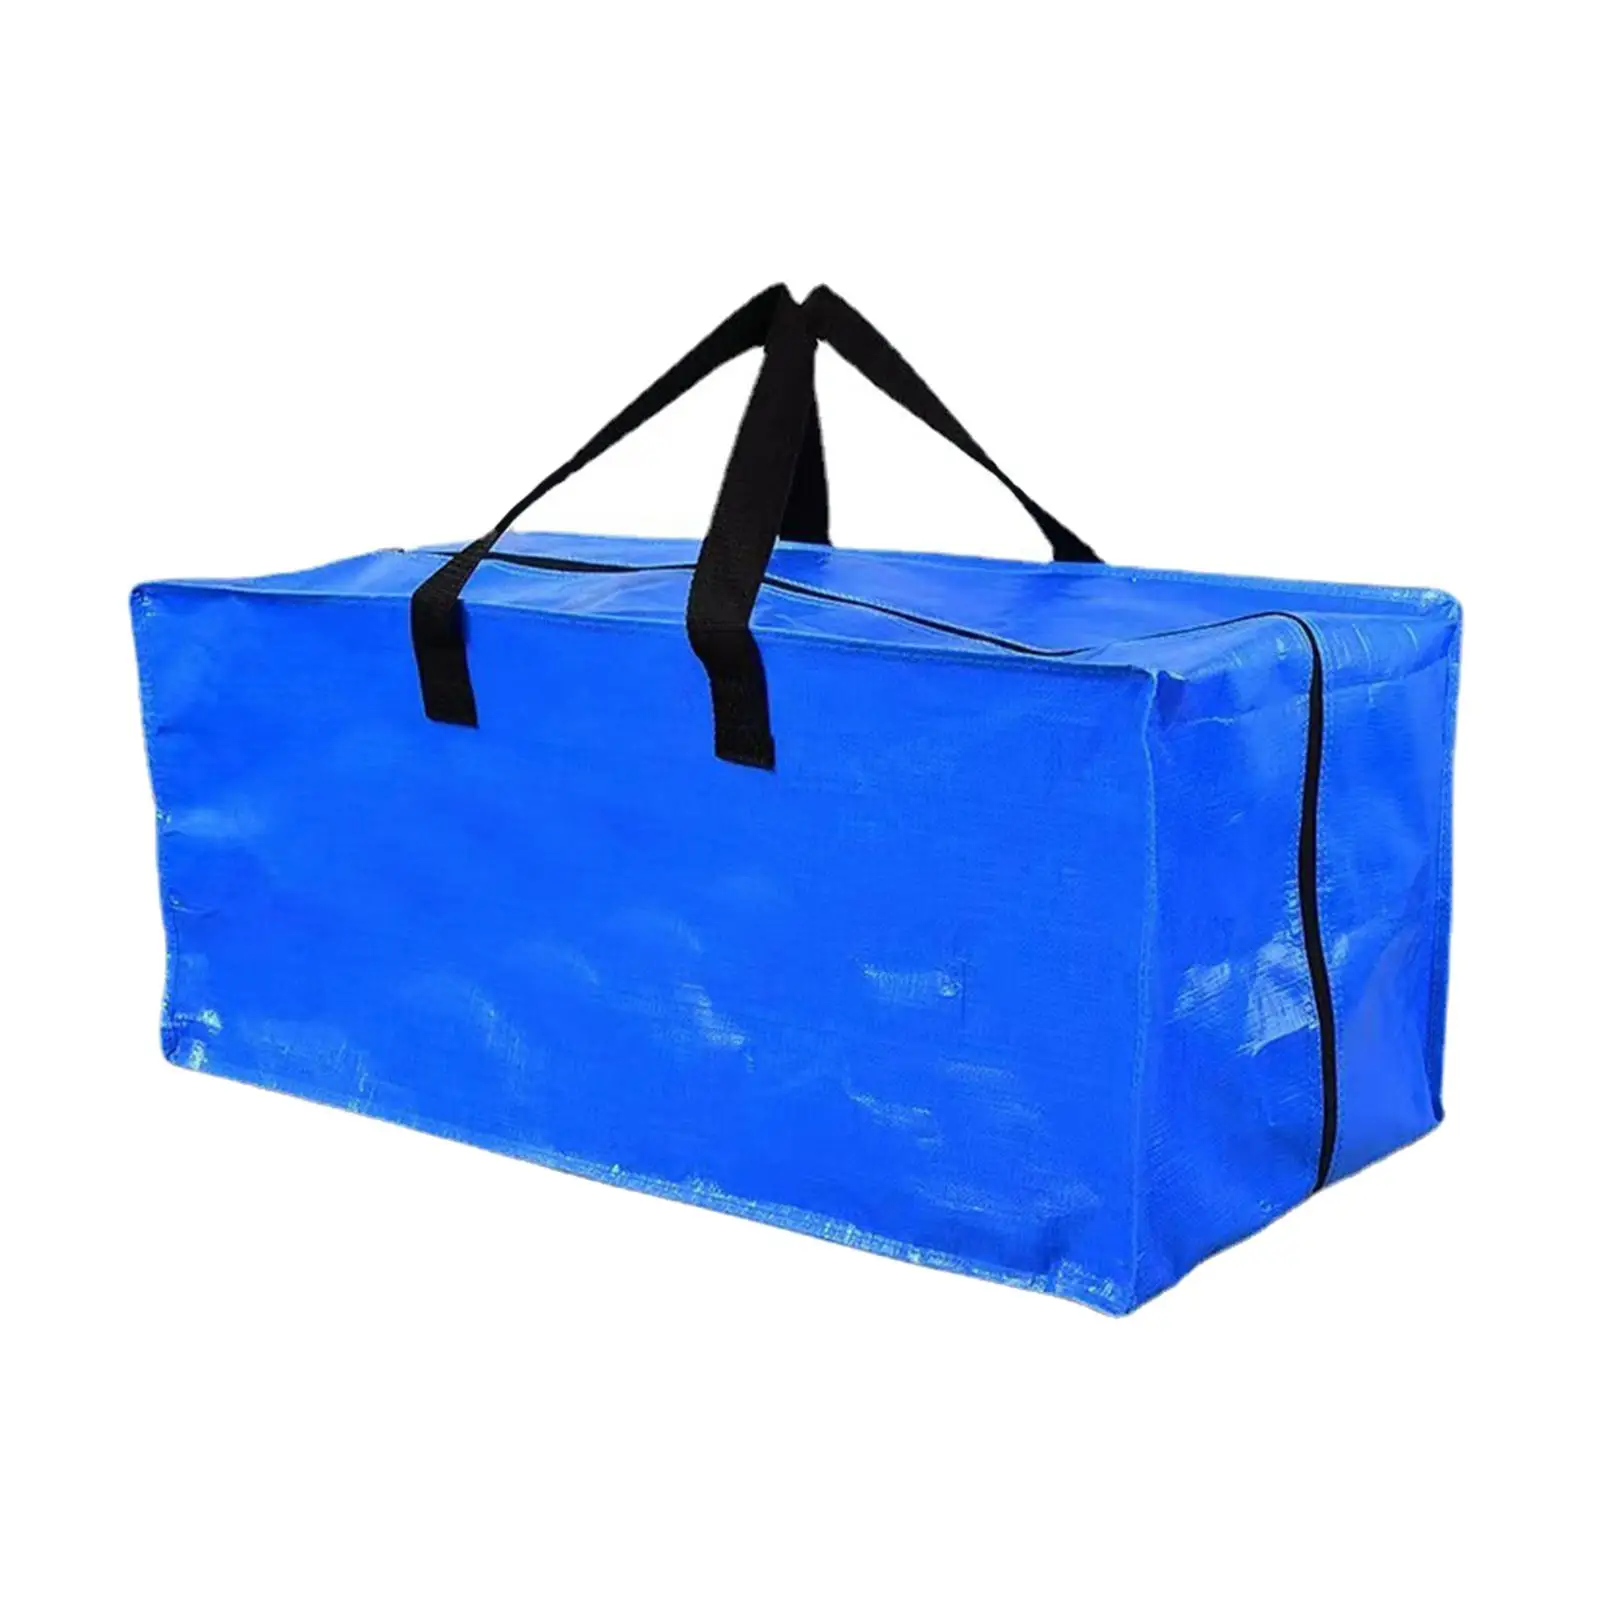 Large Moving Bags Reusable Household Organizer Storage Bags Space Saver Bags Strong Handles Packing Bags for Laundry Dorm Quilts